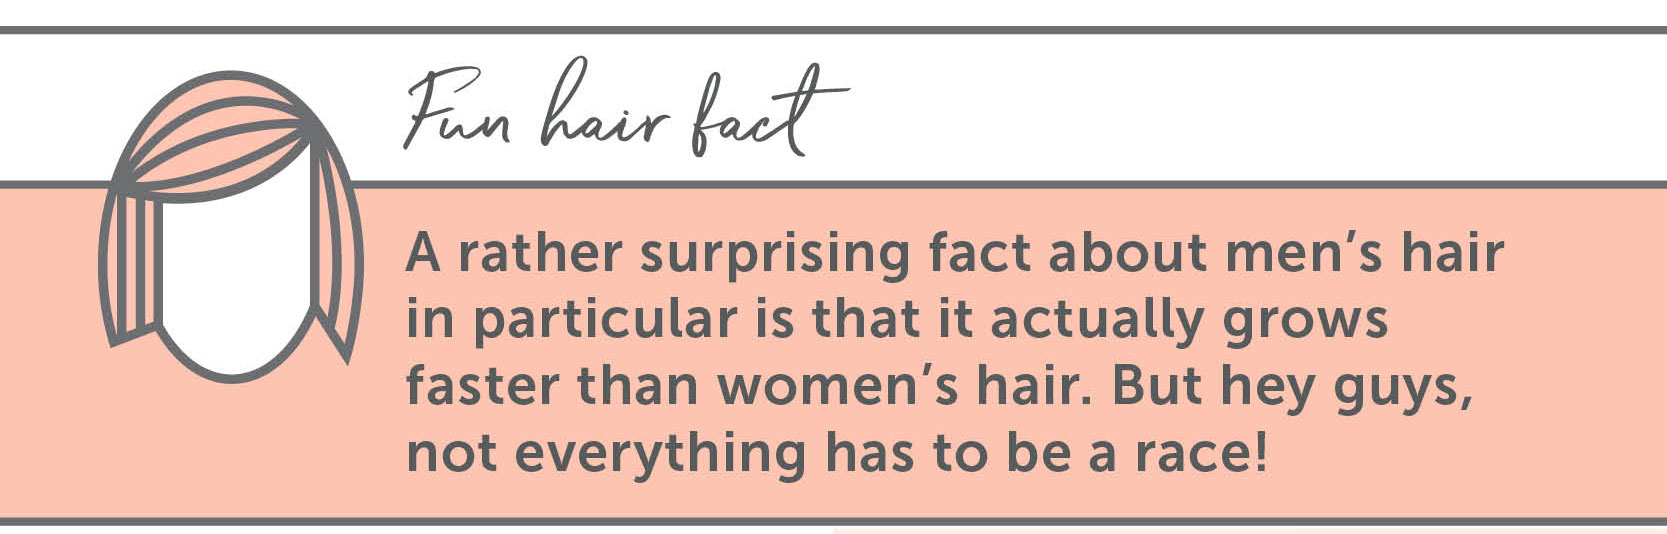 Fun Hair Facts A rather surprising fact about men’s hair in particular is that it actually grows faster than women’s hair. But hey guys, not everything has to be a race!